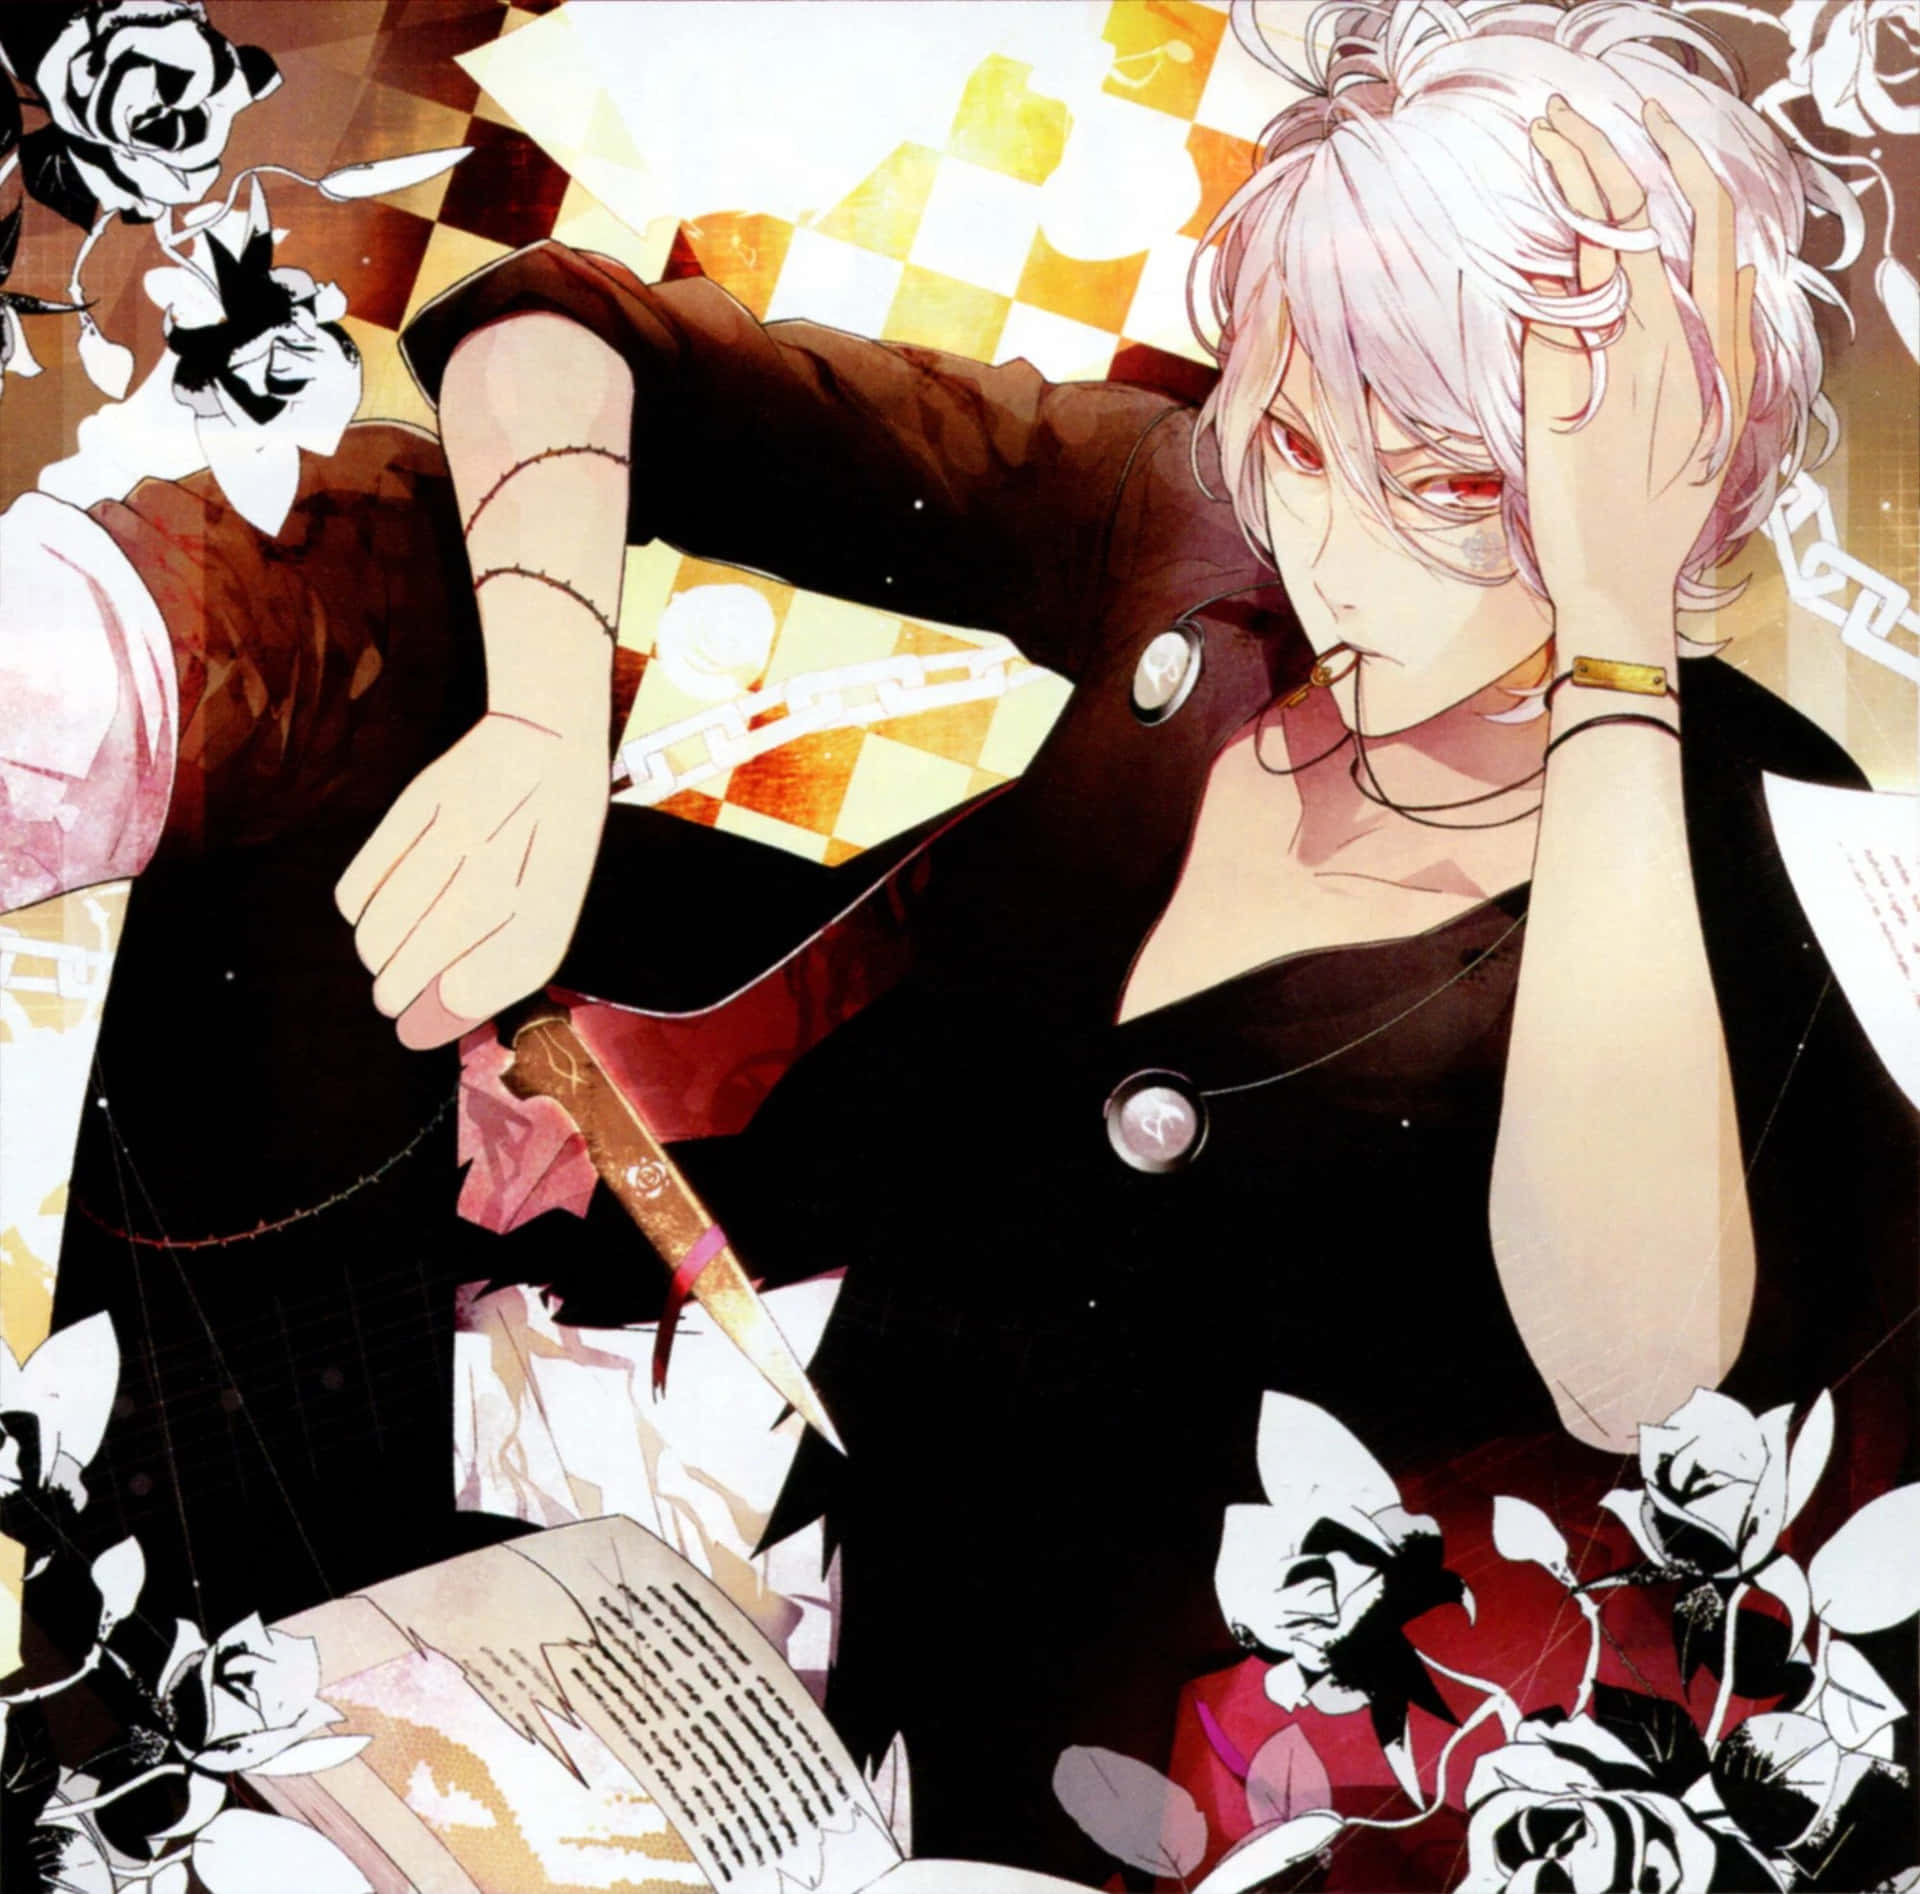 Connect with your dark side with Diabolik Lovers!